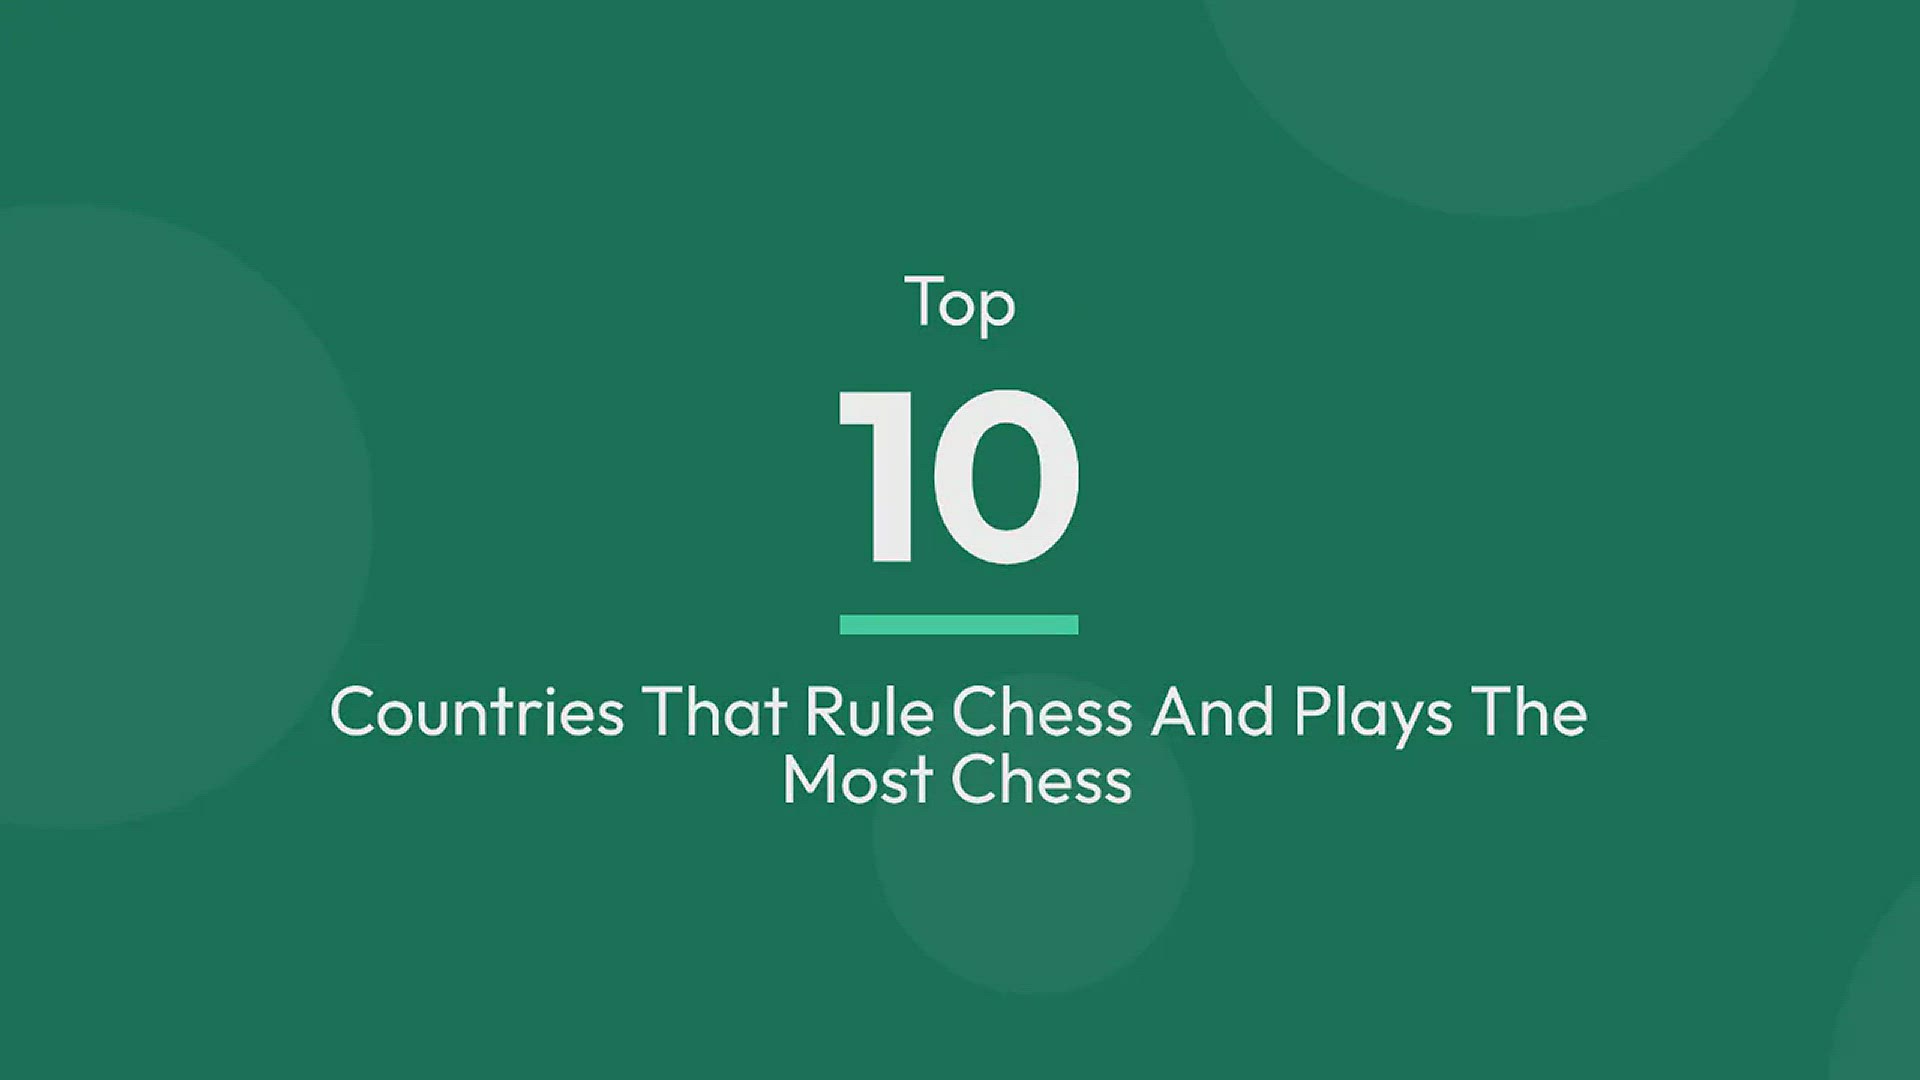 Infographic: Countries With Most Chess Grandmasters - SparkChess